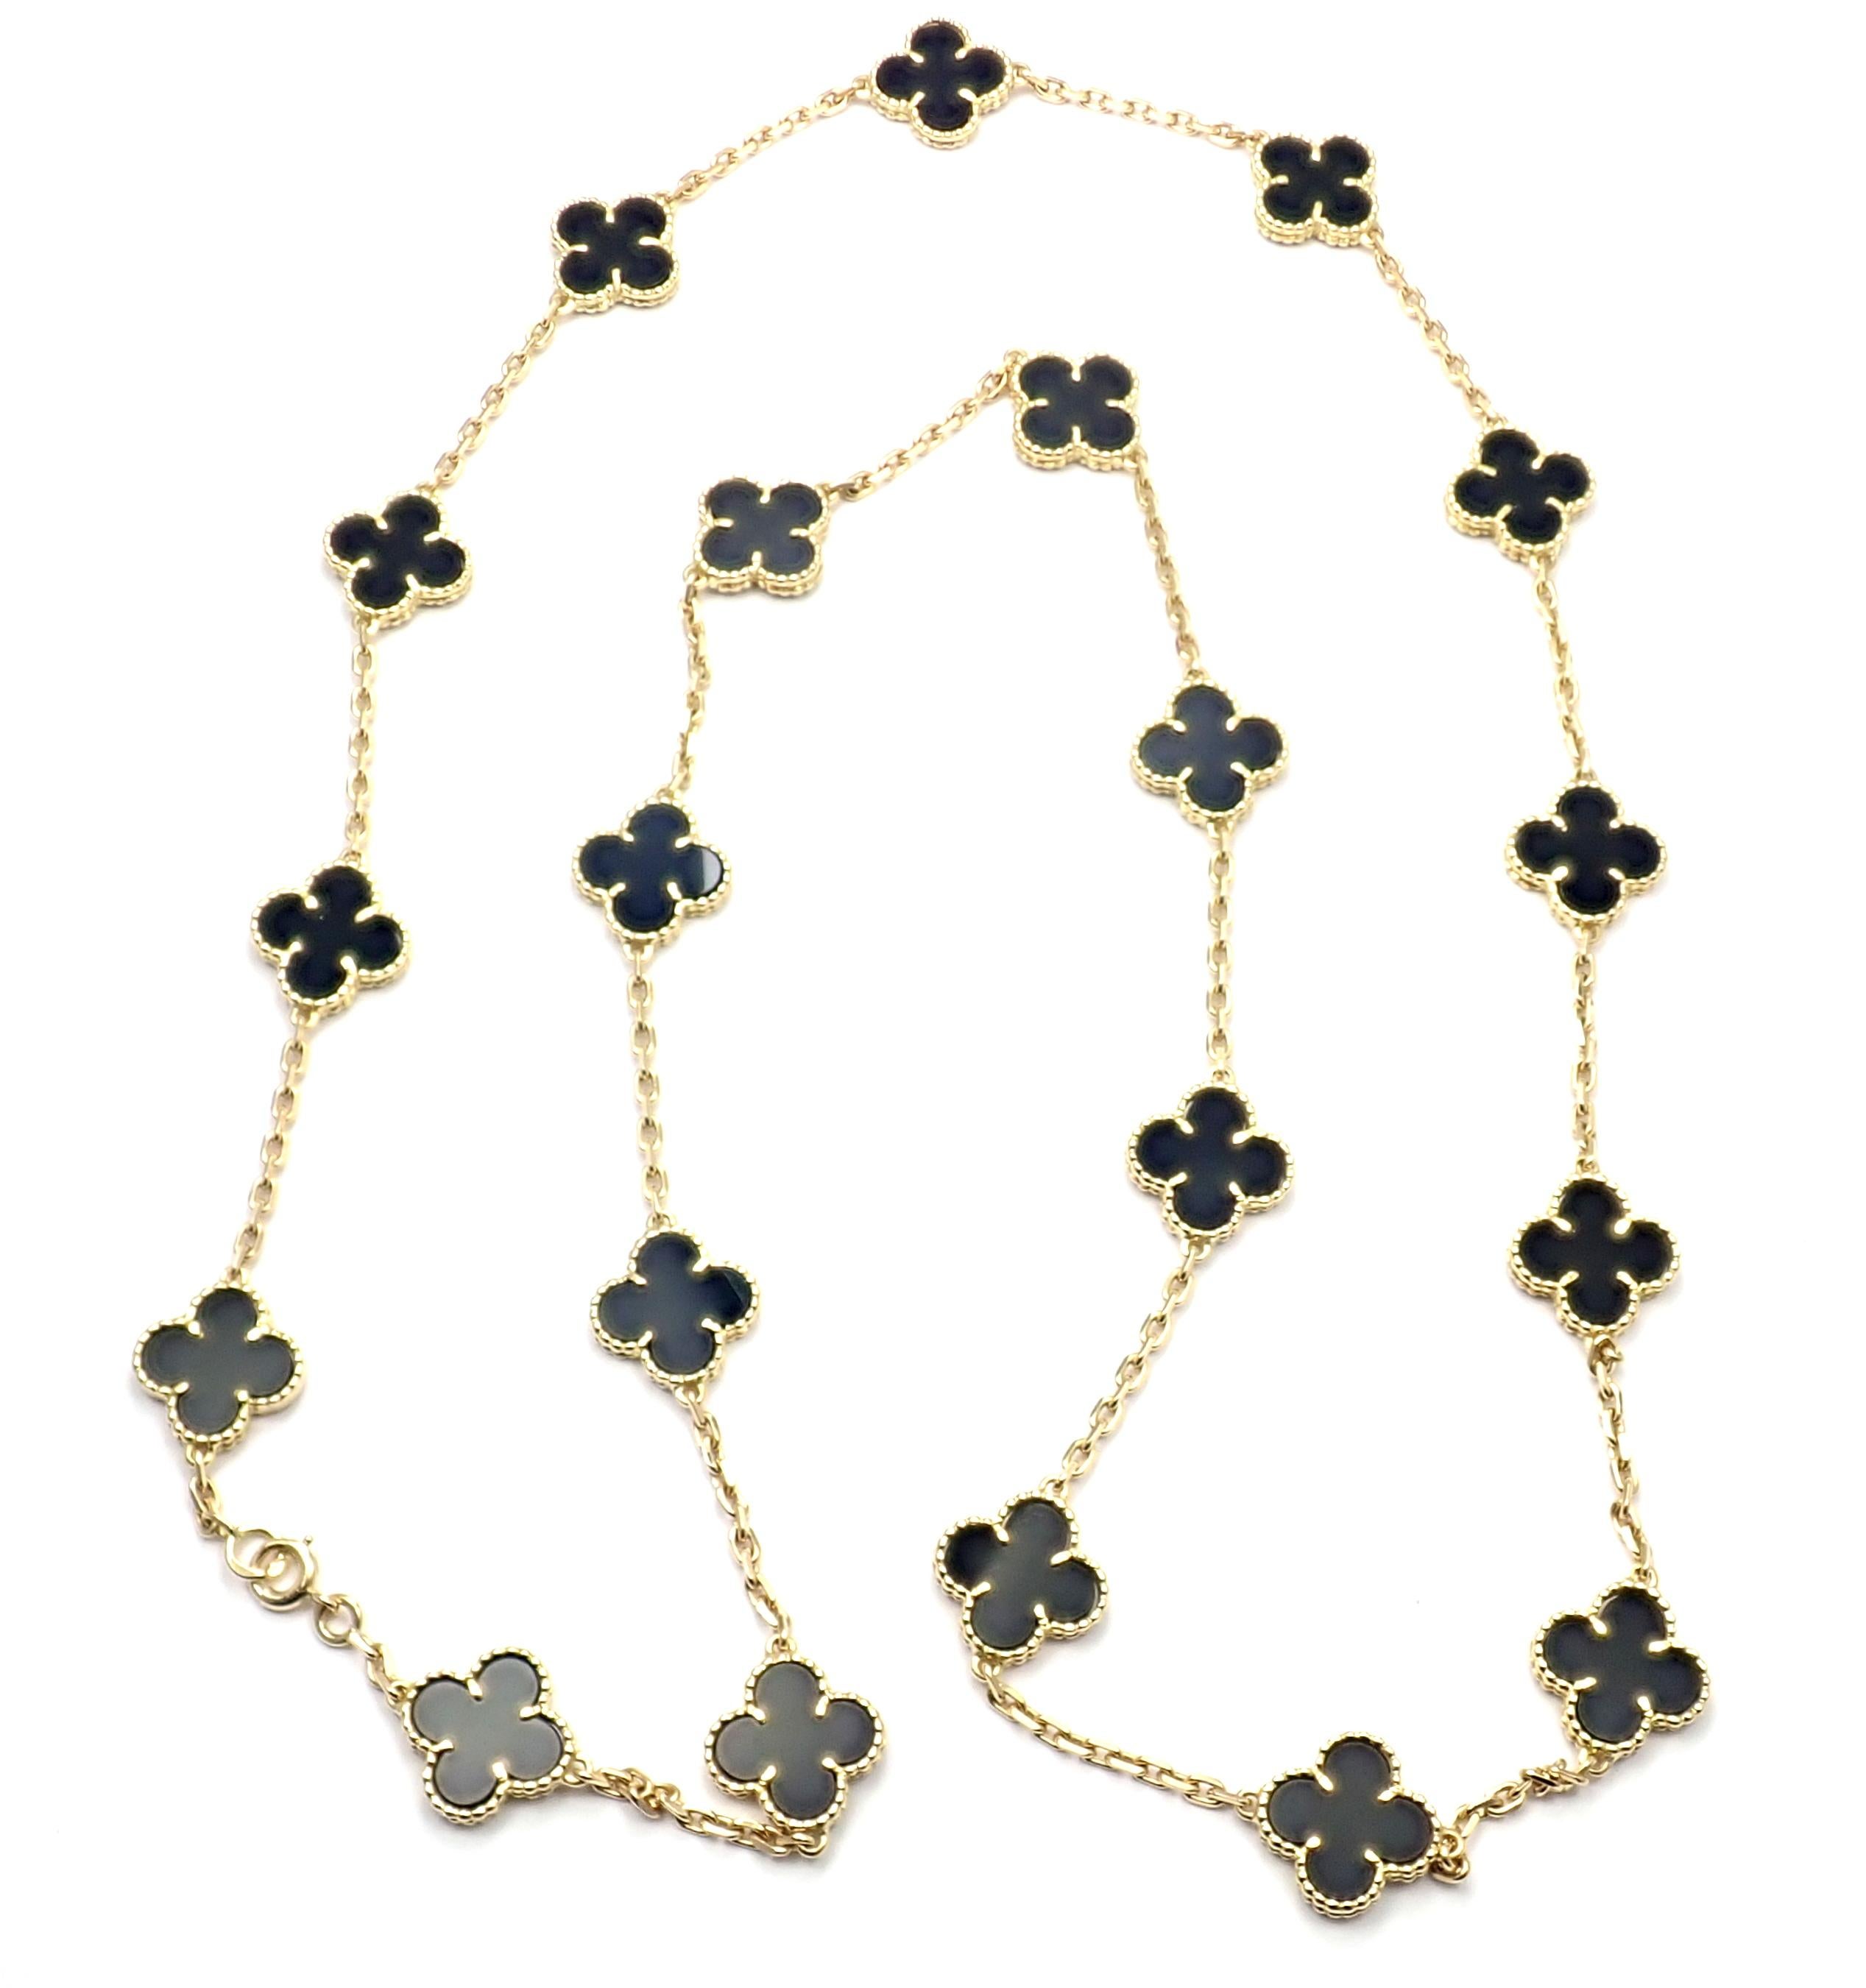 18k Yellow Gold Alhambra Twenty-Motif Black Onyx Necklace by  Van Cleef & Arpels. 
With 20 motifs of black onyx Alhambra stones, 15mm each.  
Details: 
Length: 32